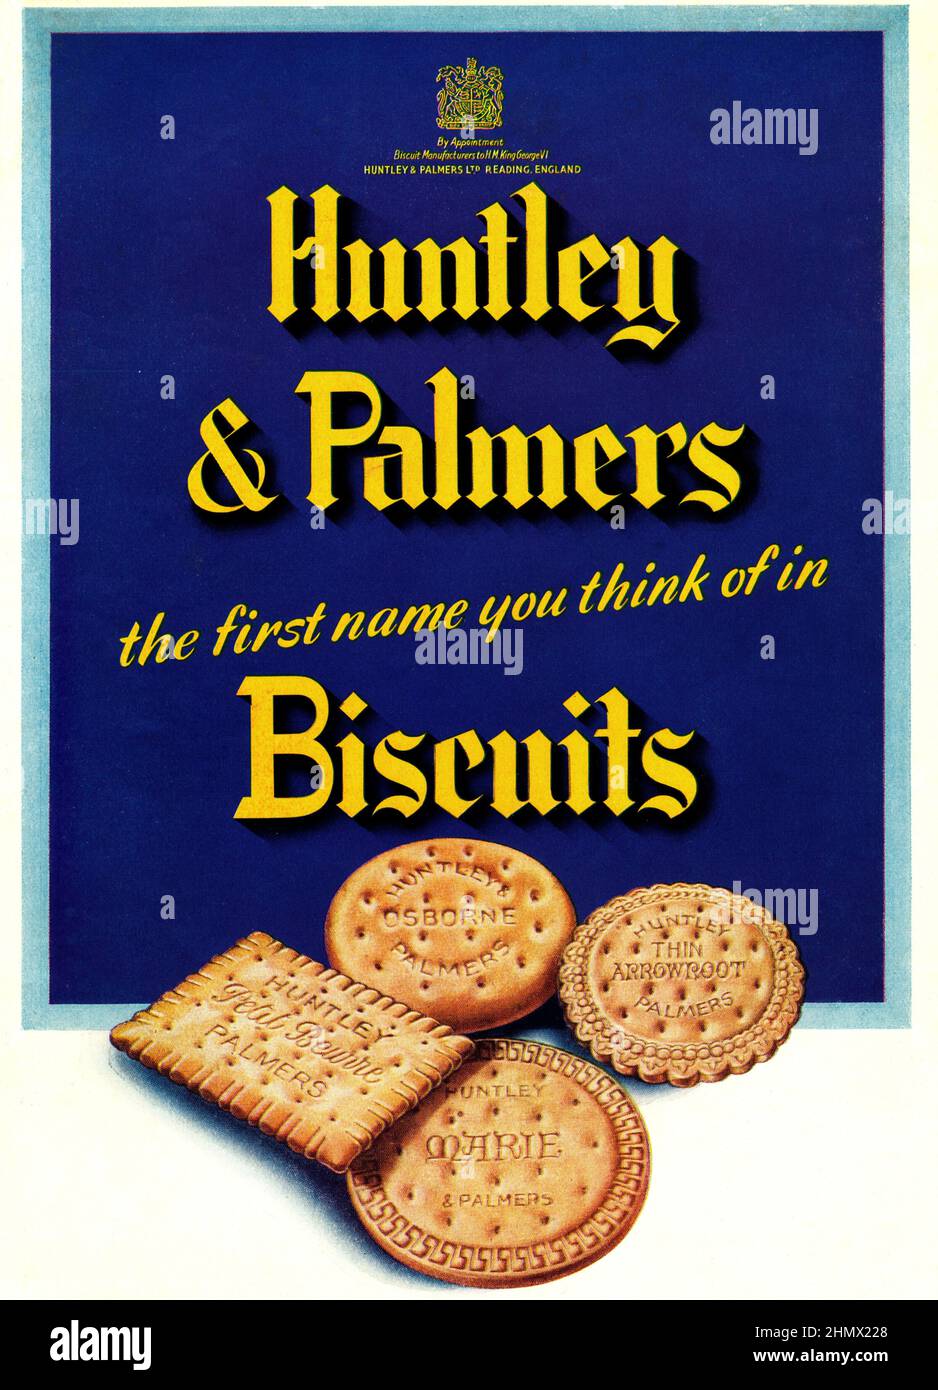 A vintage advert for Huntley & Palmers biscuits Stock Photo